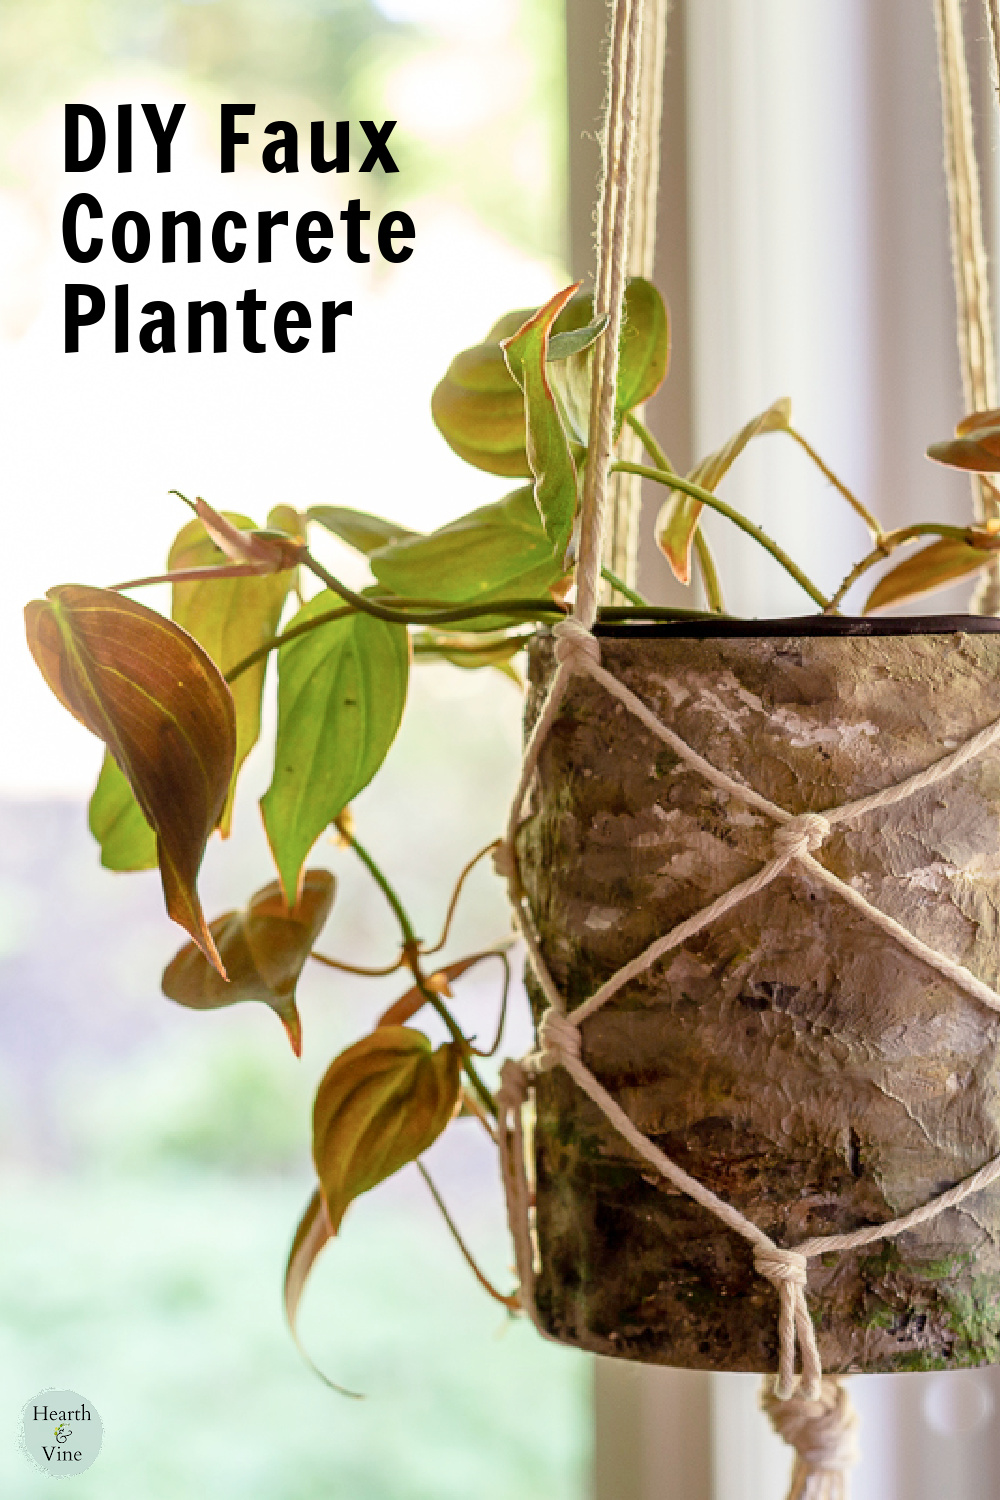 Faux concrete planter with Philodendron micans inside.